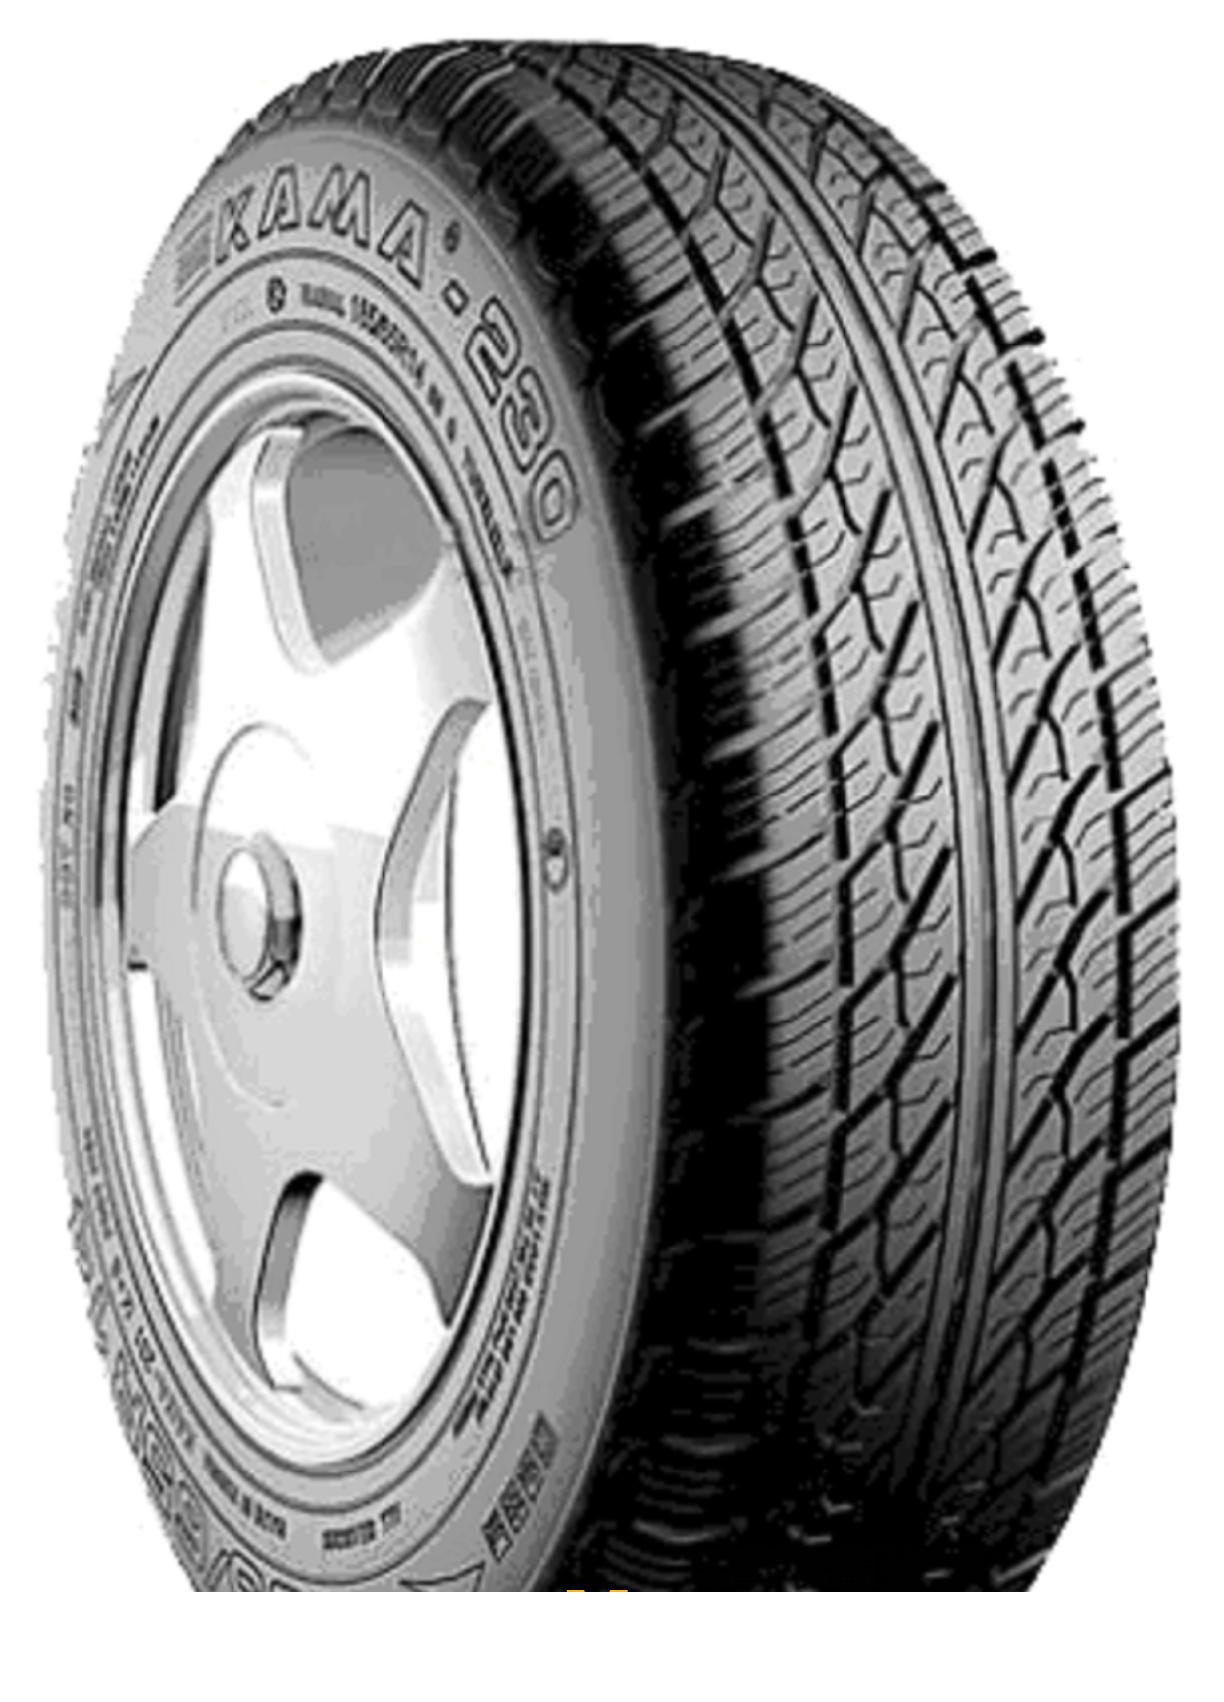 Tire Kama 230 185/65R14 86H - picture, photo, image